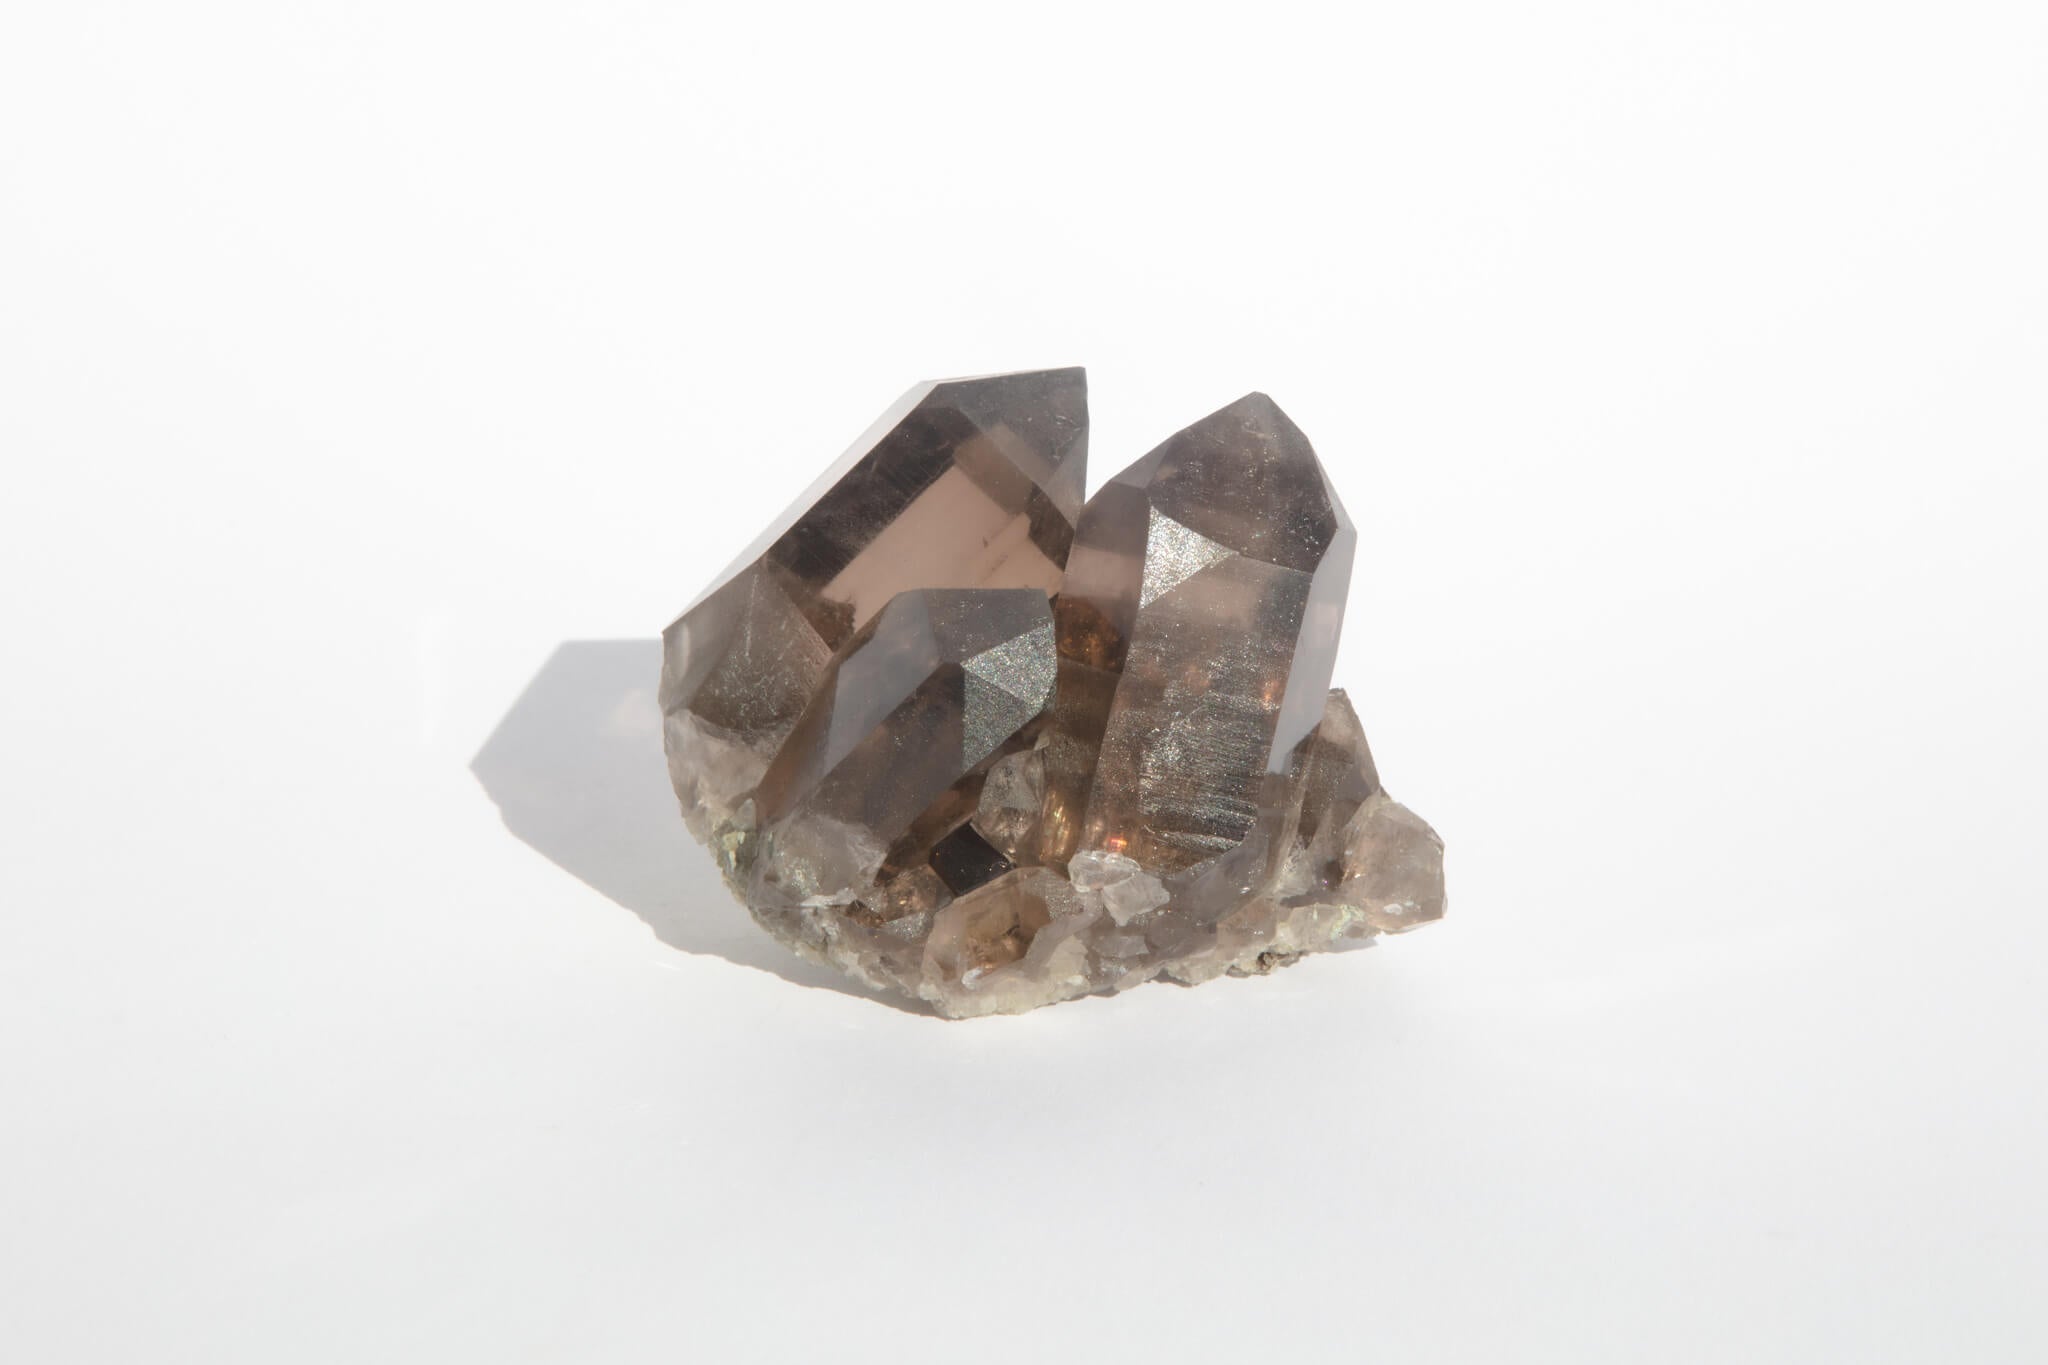 1: 235 x 3.5 x 2.26 inches - 274 g - $430 | This specimen would be ideal for supporting someone physically recover. This one is from the same mountain as the other two smoky quartzes, but on the Italian side of the border..